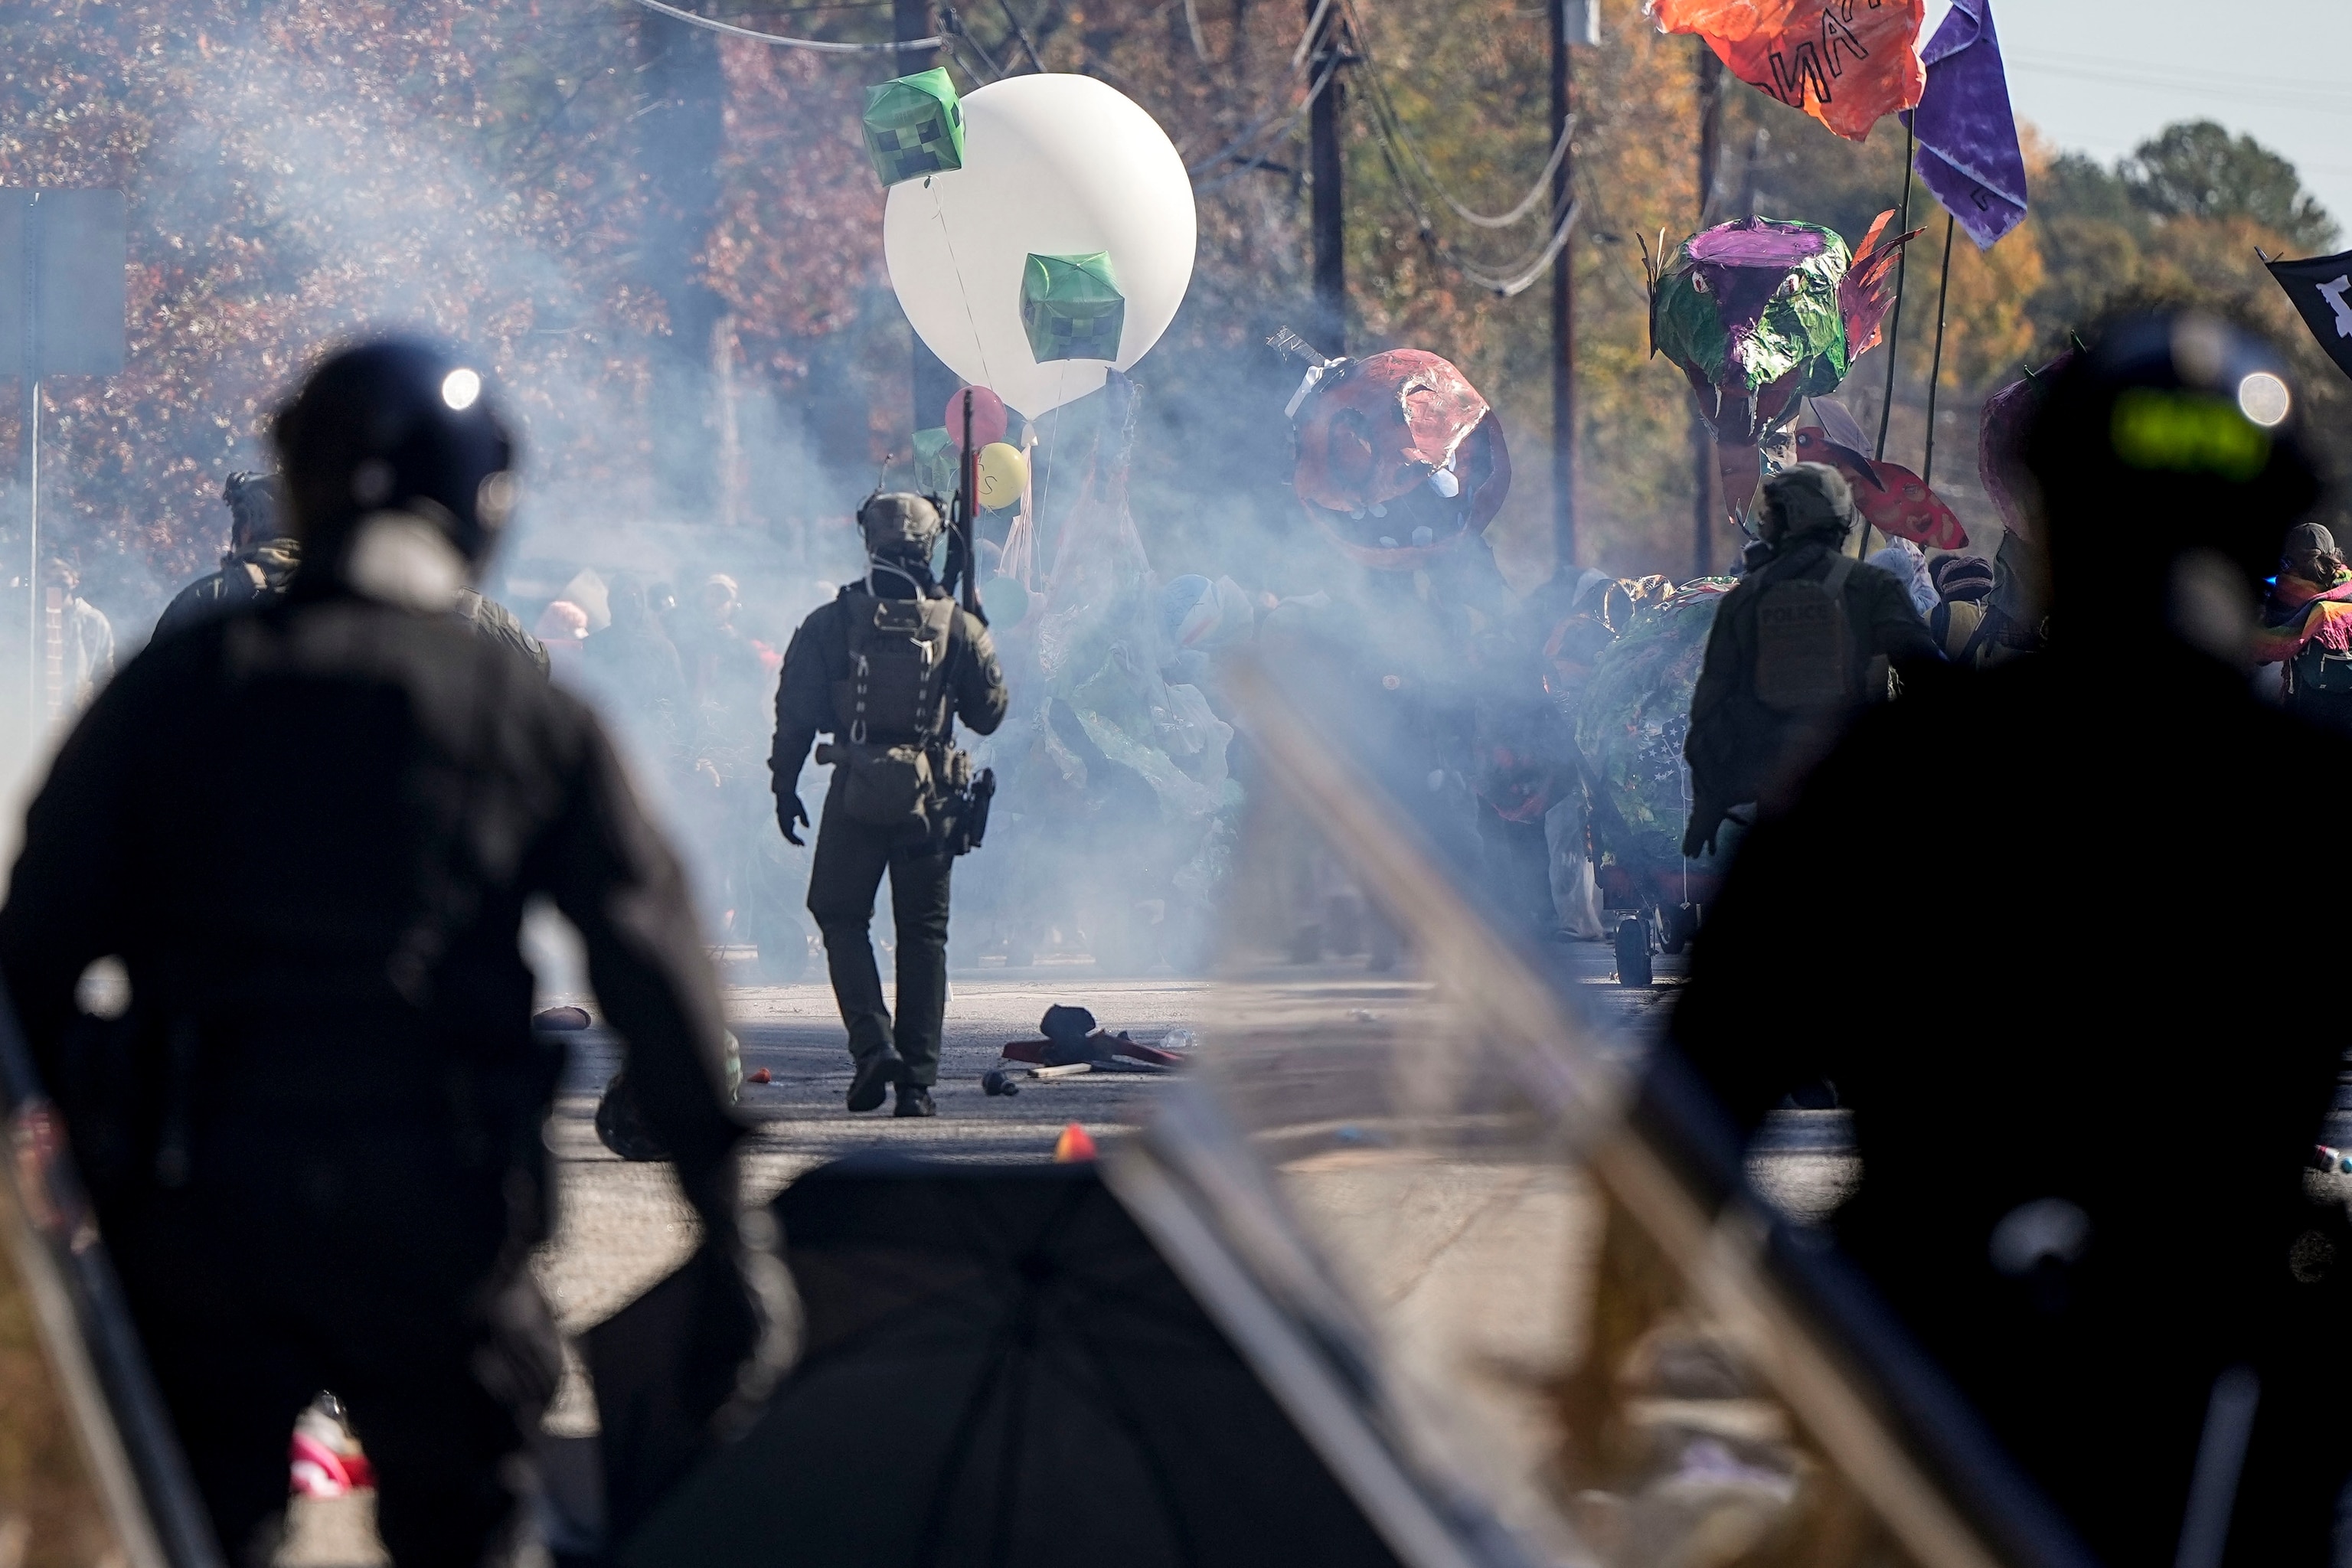 PHOTO: Police officers confront protesters in a gas cloud during a demonstration in opposition to a new police training center, Nov. 13, 2023, in Atlanta